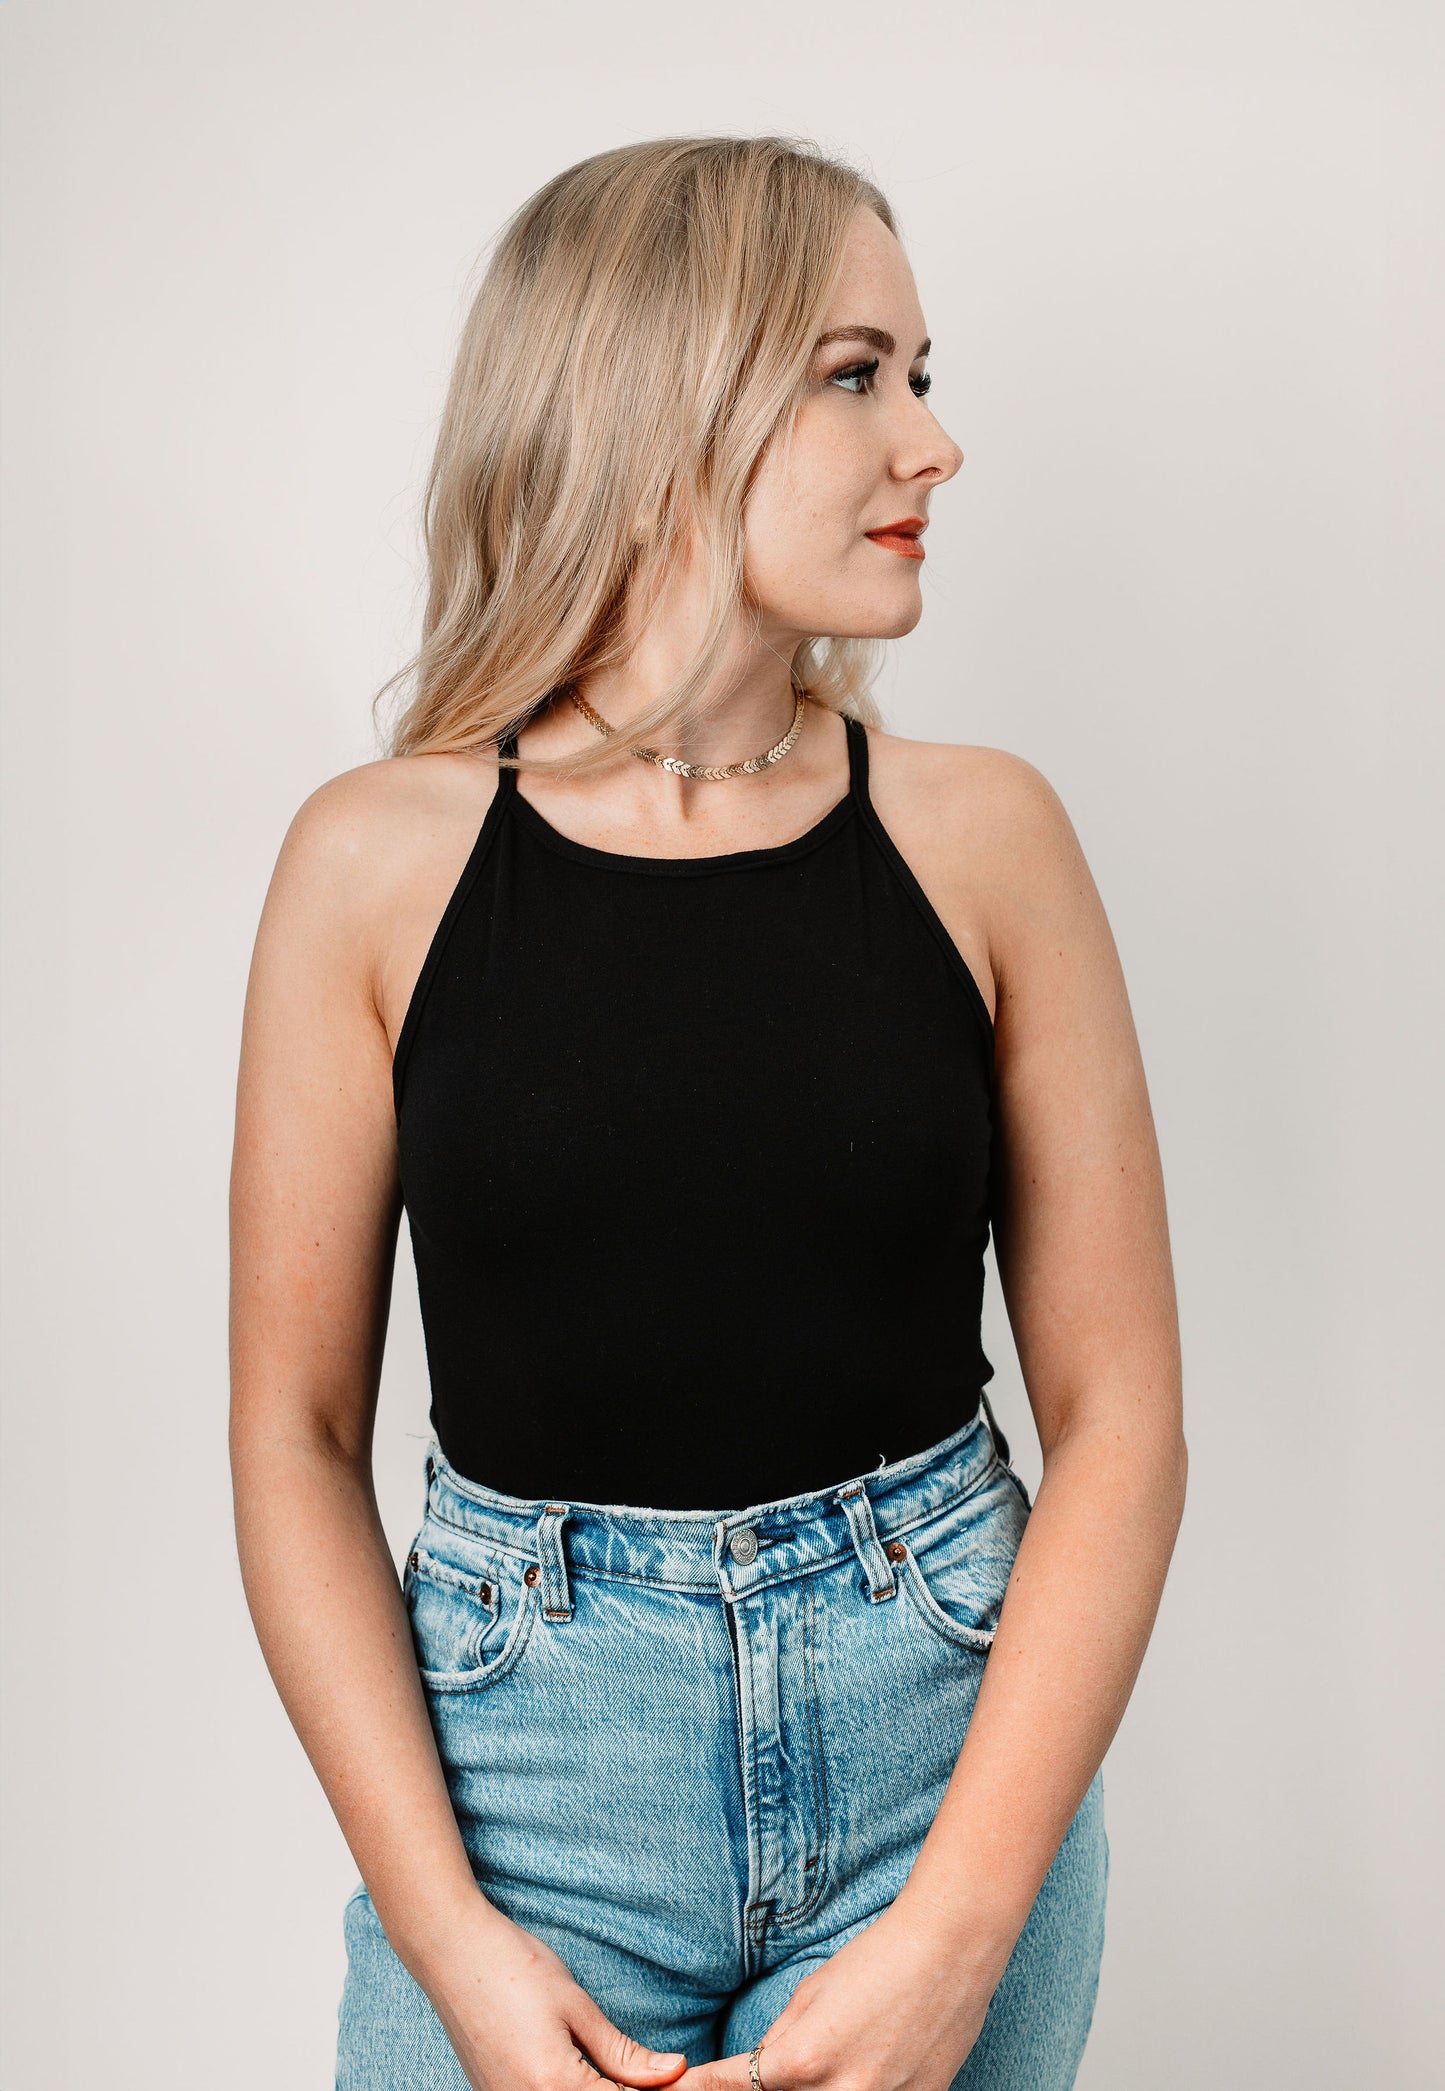 Charlotte wears the Black Willa Bodysuit in size XS. Front view.